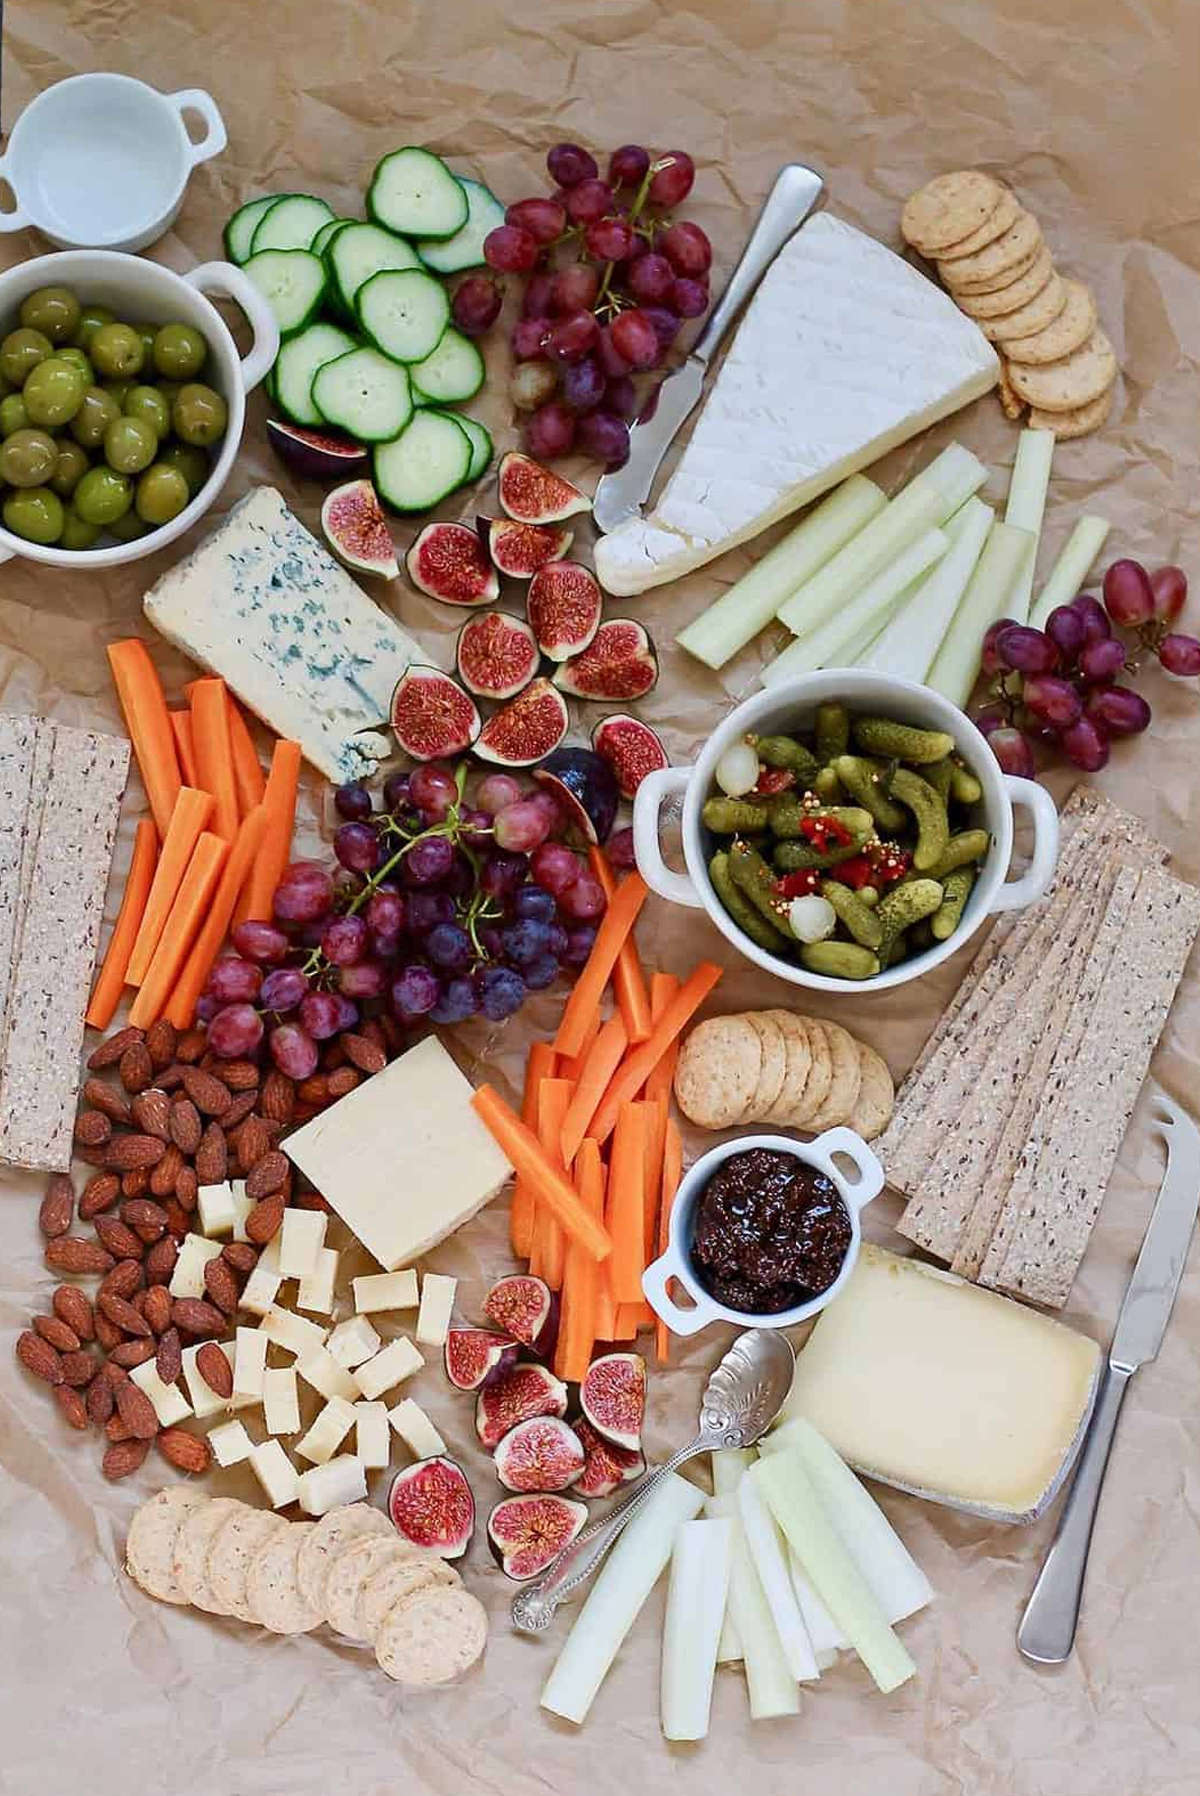 Hey Nutrition Lady presents a board full of cheese, cucumbers, pickles, carrots, and grapes.